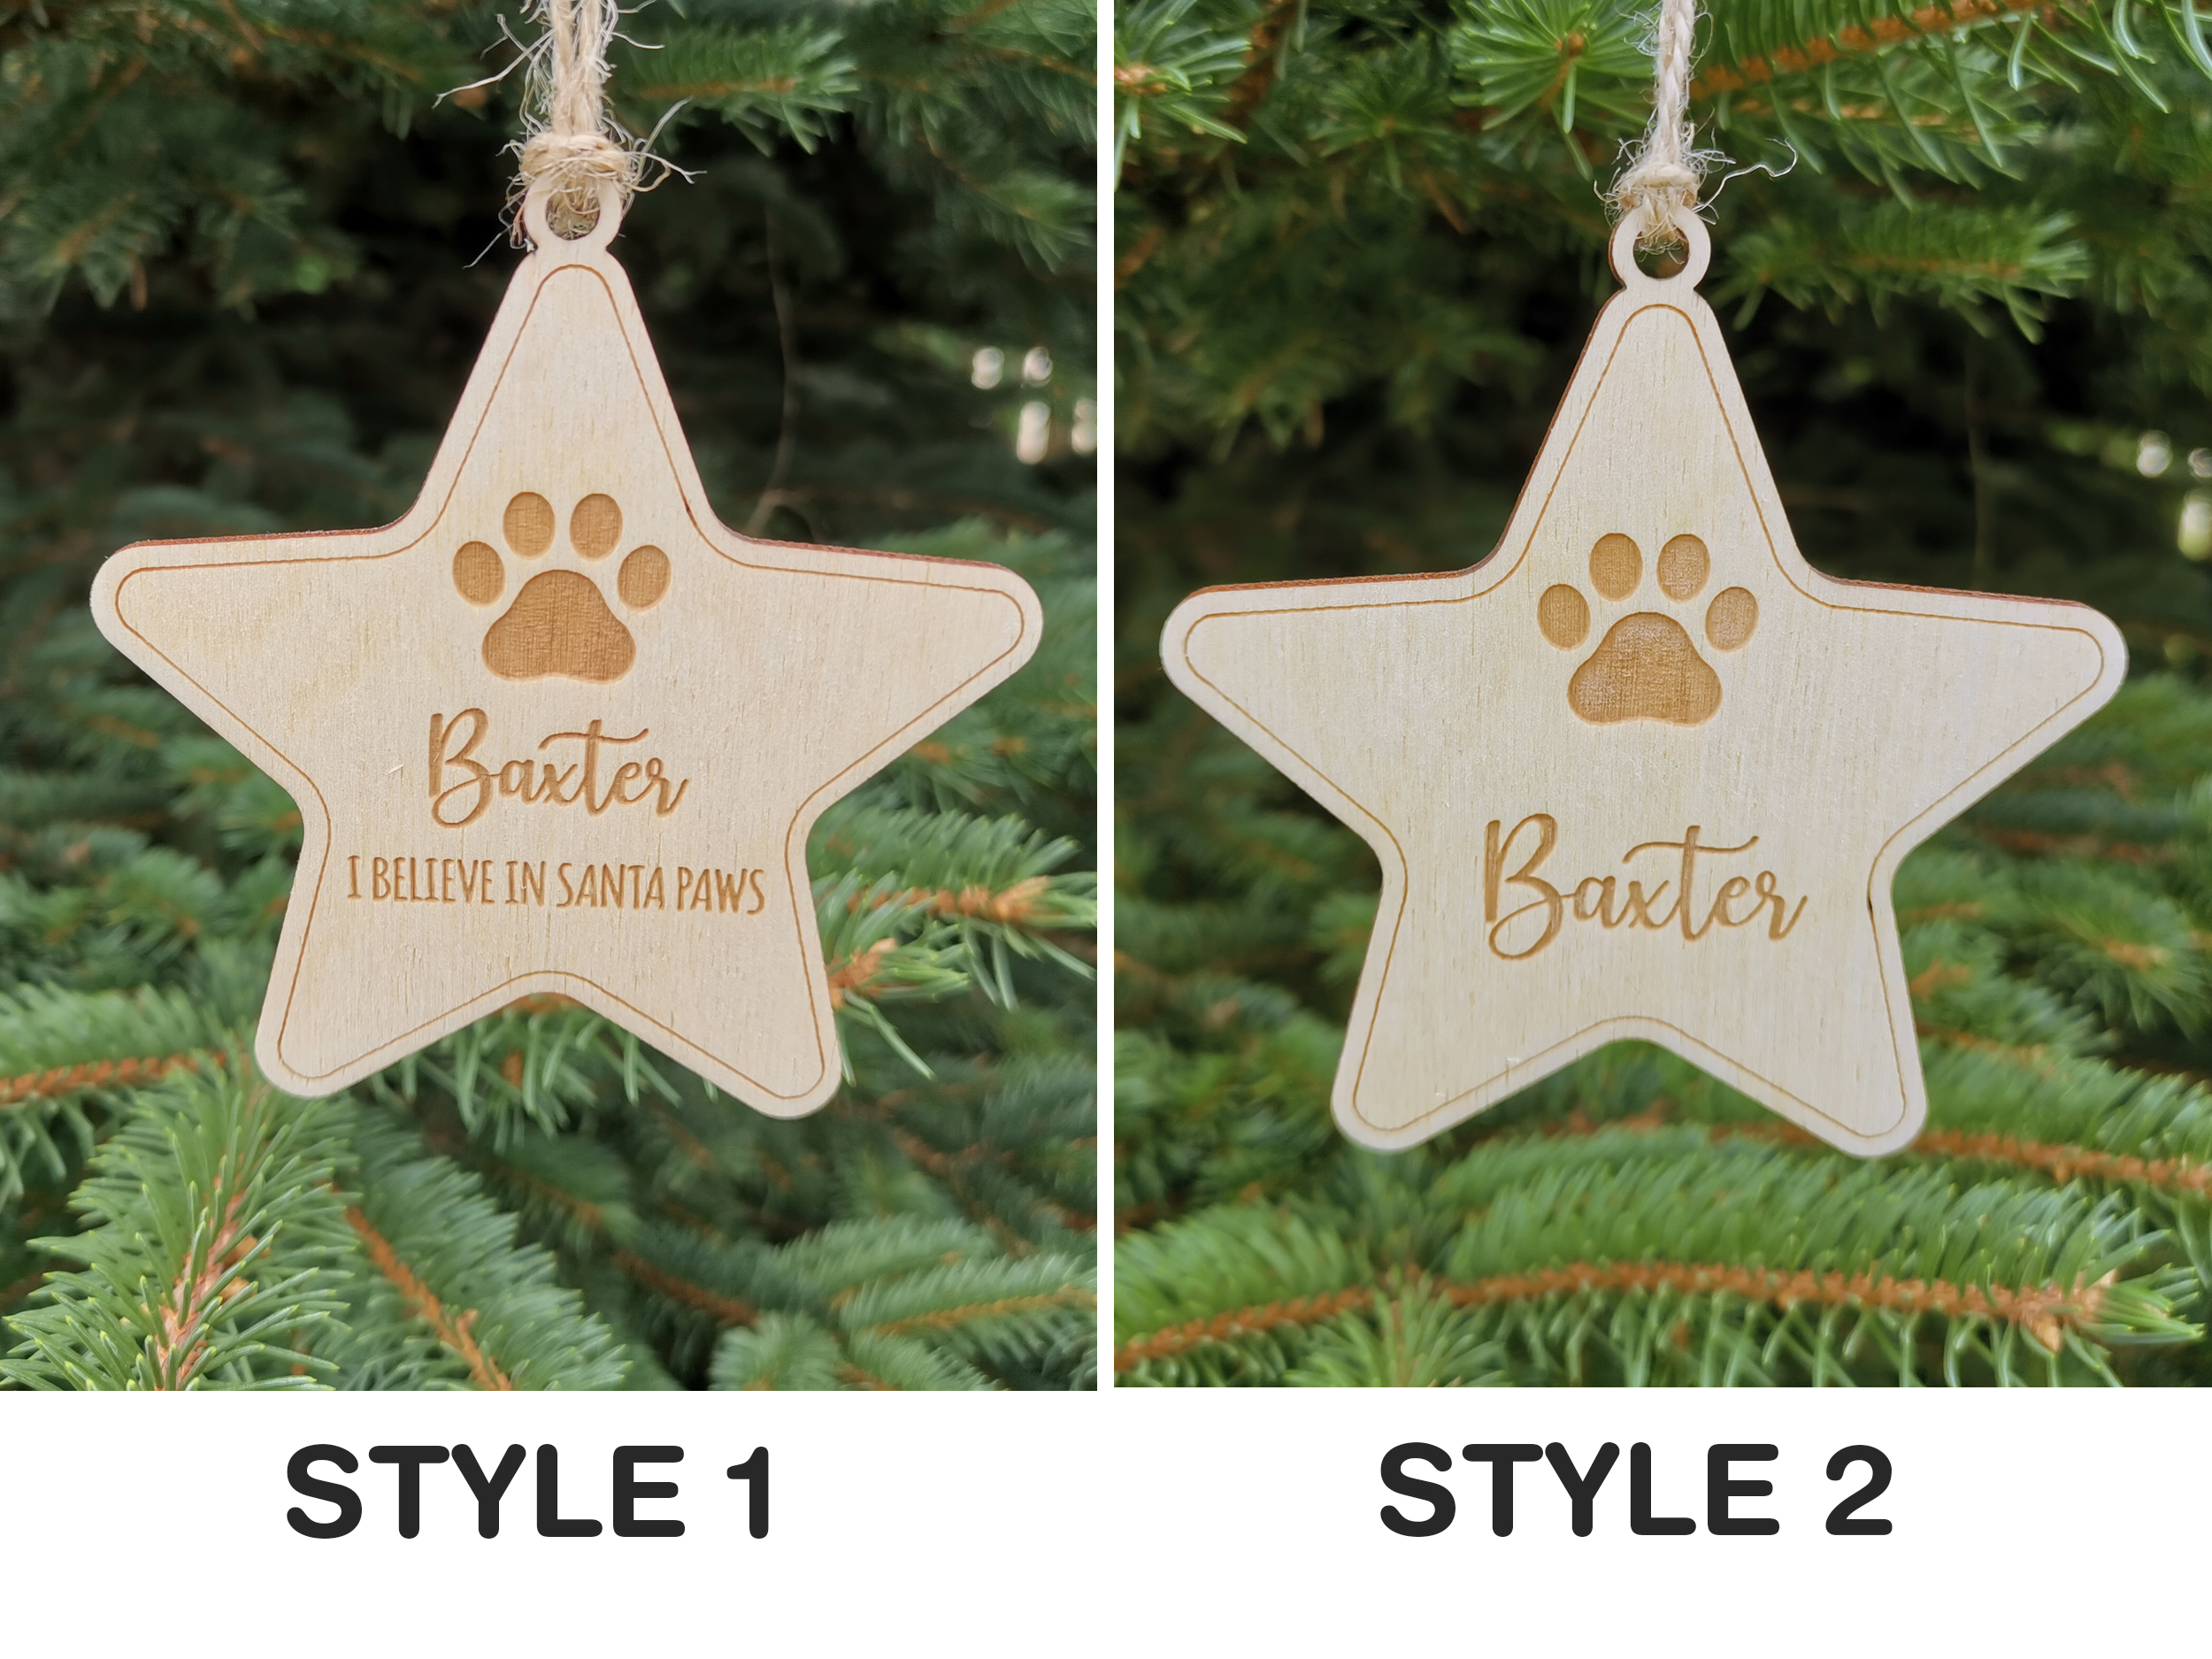 Dog Ornament Pet Memorial Gifts Custom Ornaments Christmas Christmas Gifts Personalized Crystal Ornaments Christmas Engraved Ornaments Ornaments for Christmas Tree 